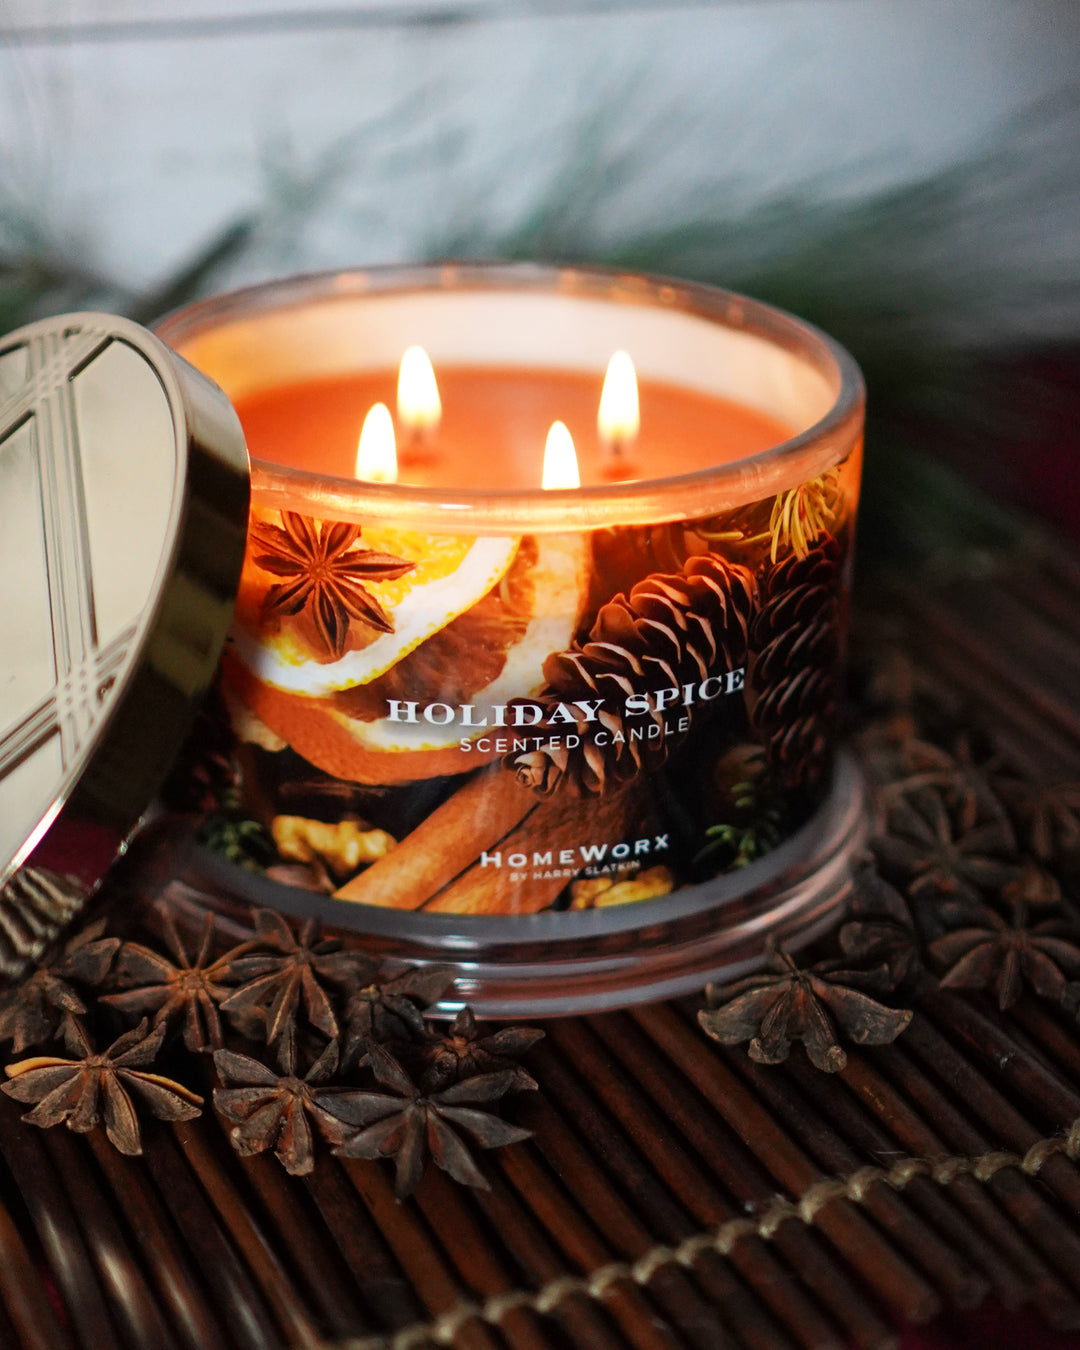 How to make your home smell cozy and inviting for the holidays